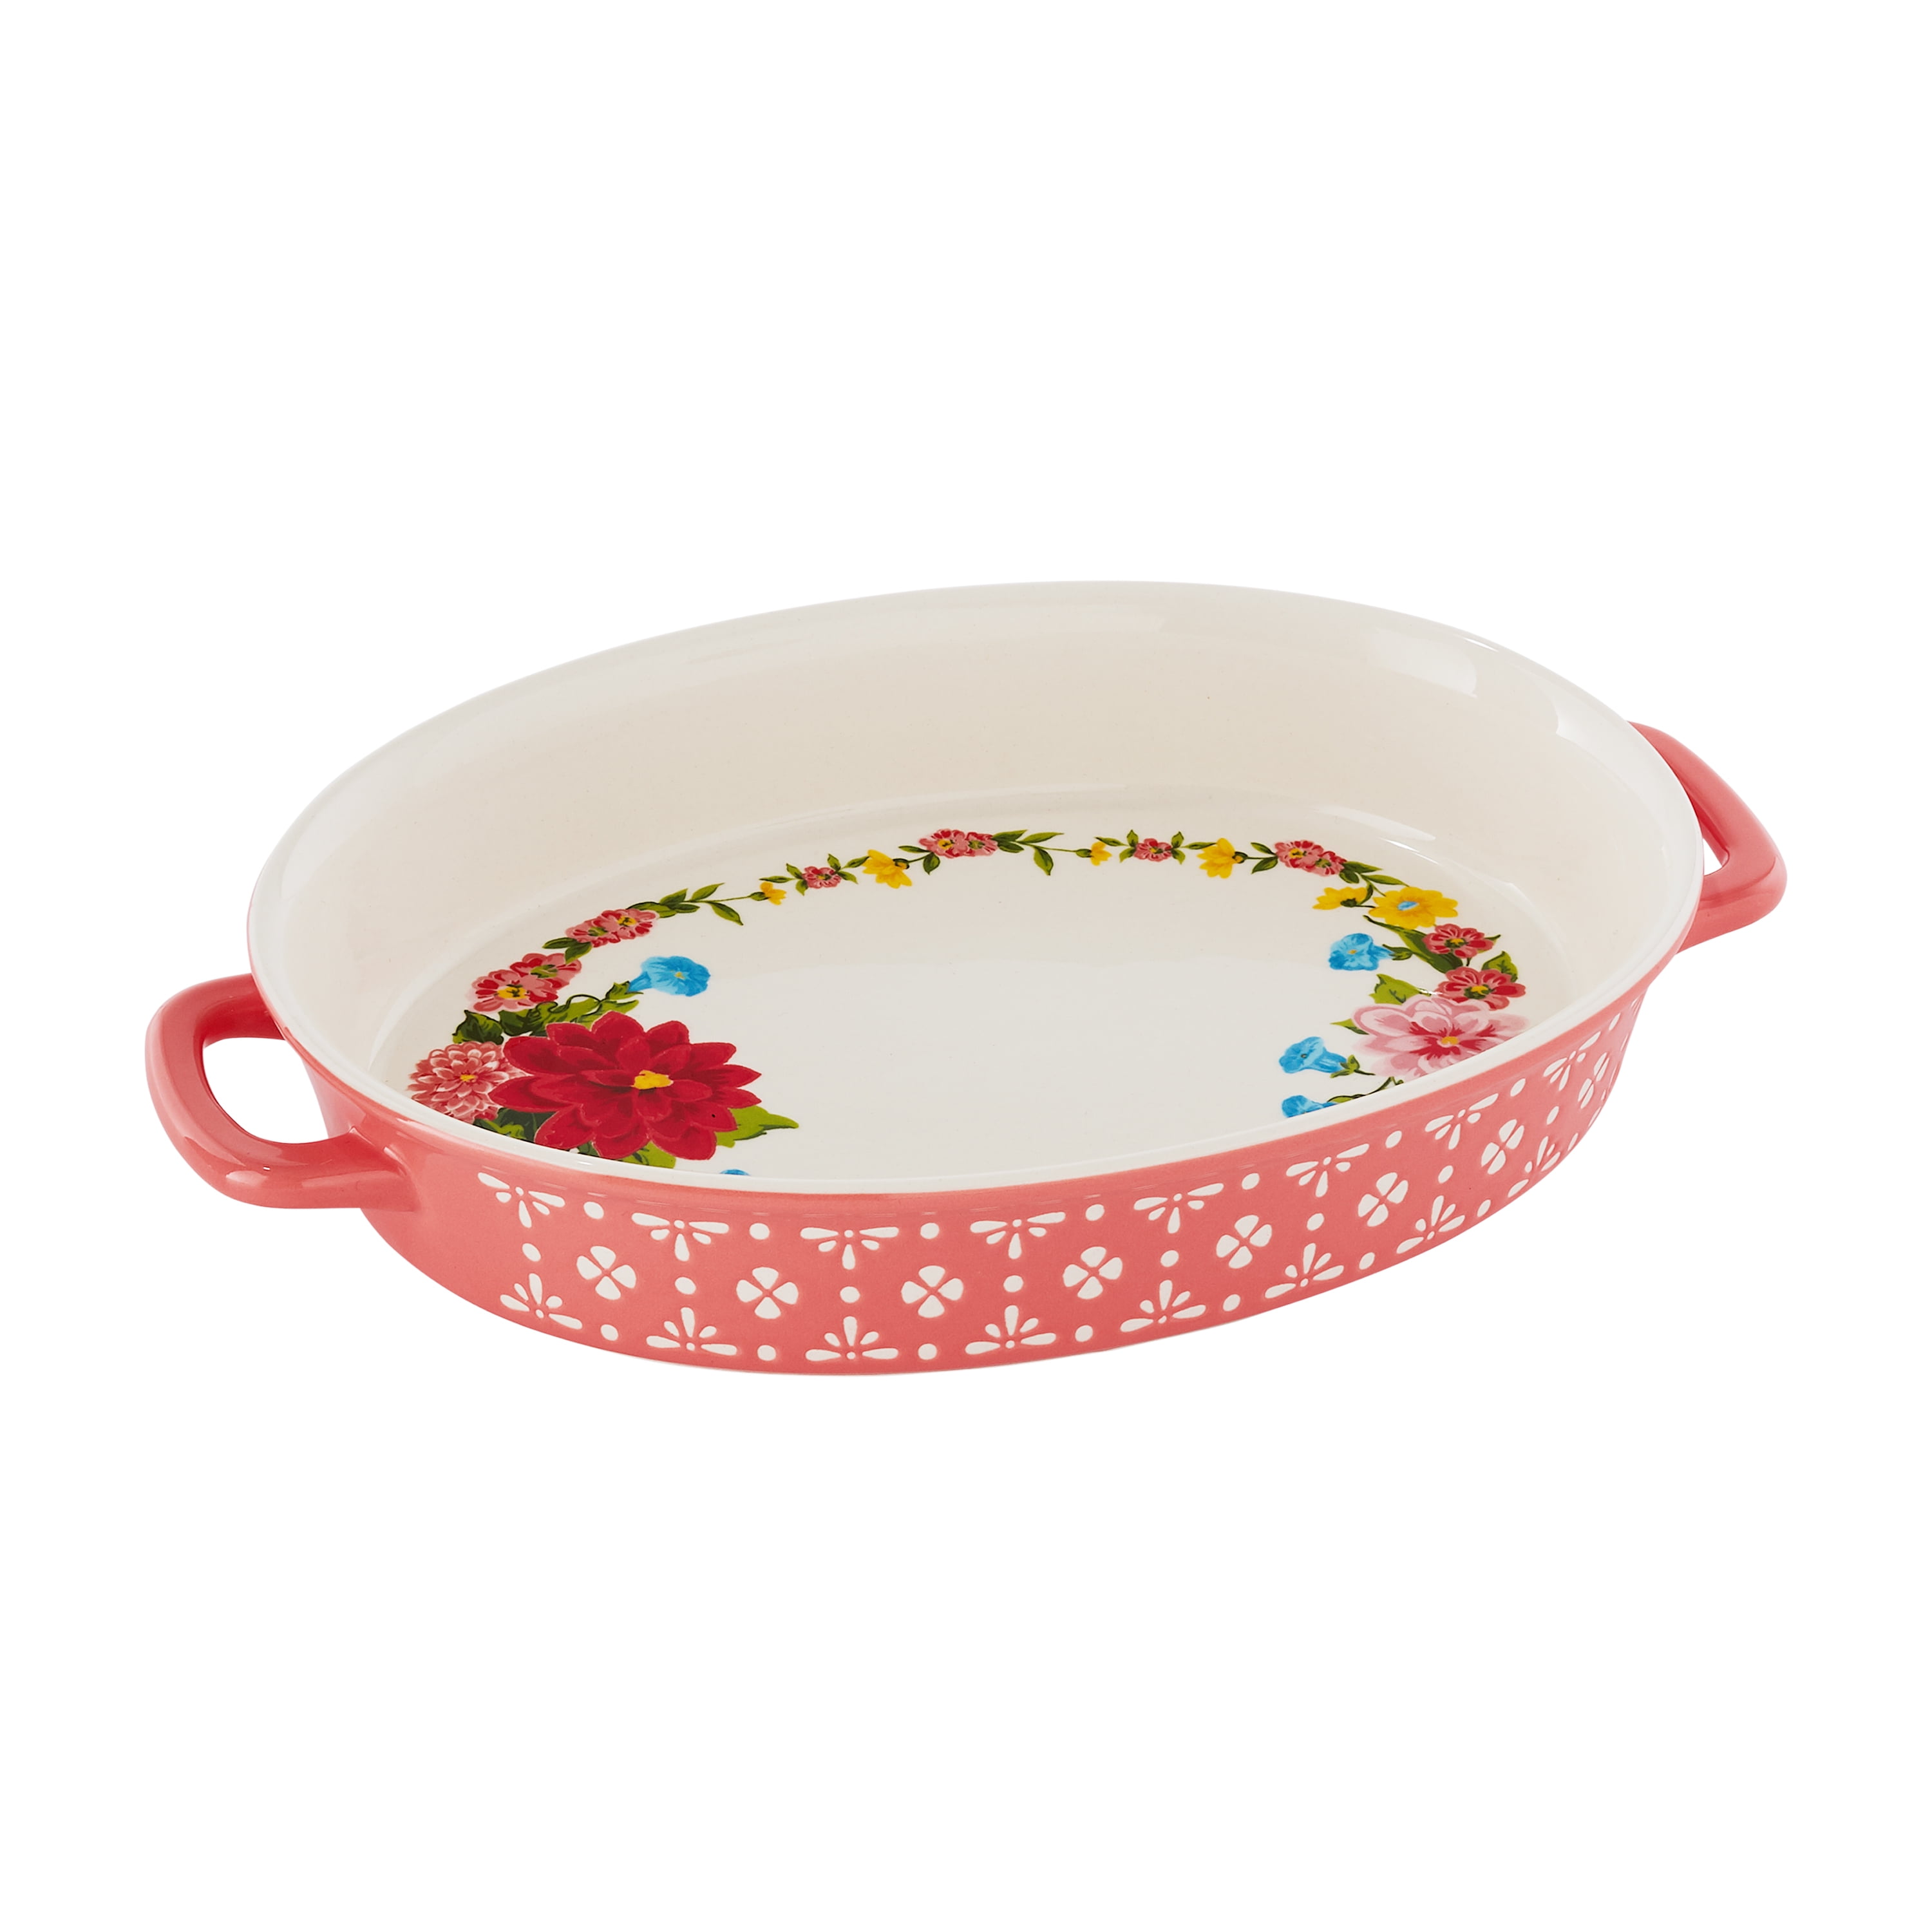 Pioneer Woman Fiona Floral 2-Piece Ceramic Oval Bakers Set Oven Safe Baking Dish 